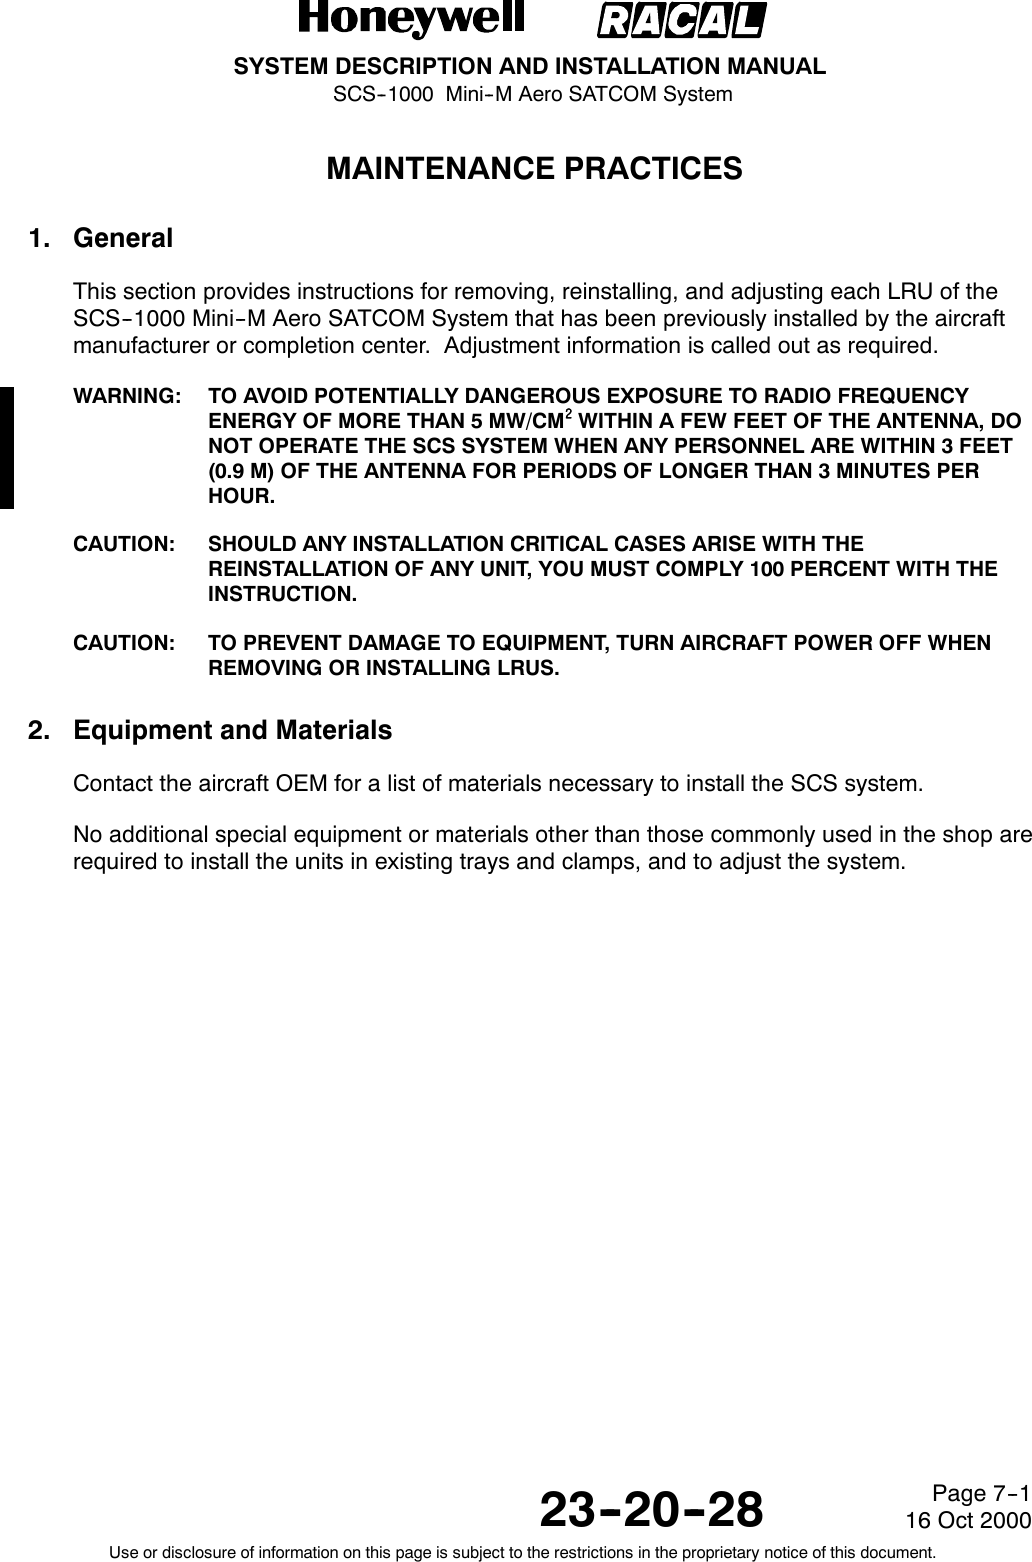 SYSTEM DESCRIPTION AND INSTALLATION MANUALSCS--1000 Mini--M Aero SATCOM System23--20--28Use or disclosure of information on this page is subject to the restrictions in the proprietary notice of this document.Page 7--116 Oct 2000MAINTENANCE PRACTICES1. GeneralThis section provides instructions for removing, reinstalling, and adjusting each LRU of theSCS--1000 Mini--M Aero SATCOM System that has been previously installed by the aircraftmanufacturer or completion center. Adjustment information is called out as required.WARNING: TO AVOID POTENTIALLY DANGEROUS EXPOSURE TO RADIO FREQUENCYENERGY OF MORE THAN 5 MW/CM@@@@WITHIN A FEW FEET OF THE ANTENNA, DONOT OPERATE THE SCS SYSTEM WHEN ANY PERSONNEL ARE WITHIN 3 FEET(0.9 M) OF THE ANTENNA FOR PERIODS OF LONGER THAN 3 MINUTES PERHOUR.CAUTION: SHOULD ANY INSTALLATION CRITICAL CASES ARISE WITH THEREINSTALLATION OF ANY UNIT, YOU MUST COMPLY 100 PERCENT WITH THEINSTRUCTION.CAUTION: TO PREVENT DAMAGE TO EQUIPMENT, TURN AIRCRAFT POWER OFF WHENREMOVING OR INSTALLING LRUS.2. Equipment and MaterialsContact the aircraft OEM for a list of materials necessary to install the SCS system.No additional special equipment or materials other than those commonly used in the shop arerequired to install the units in existing trays and clamps, and to adjust the system.